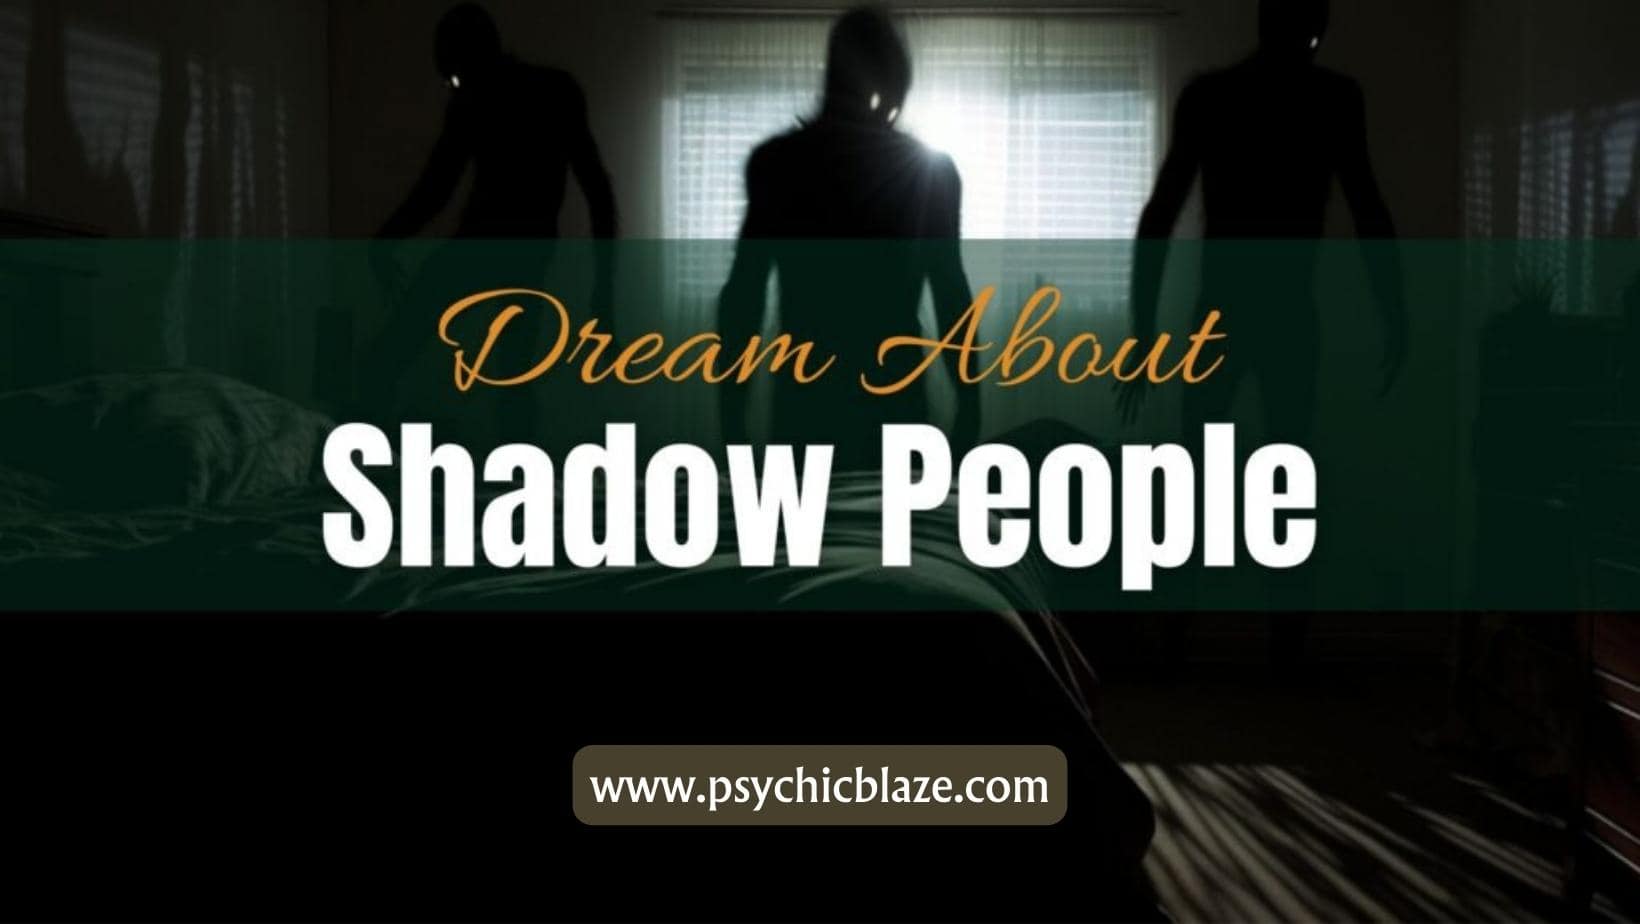 Dream about Shadow People